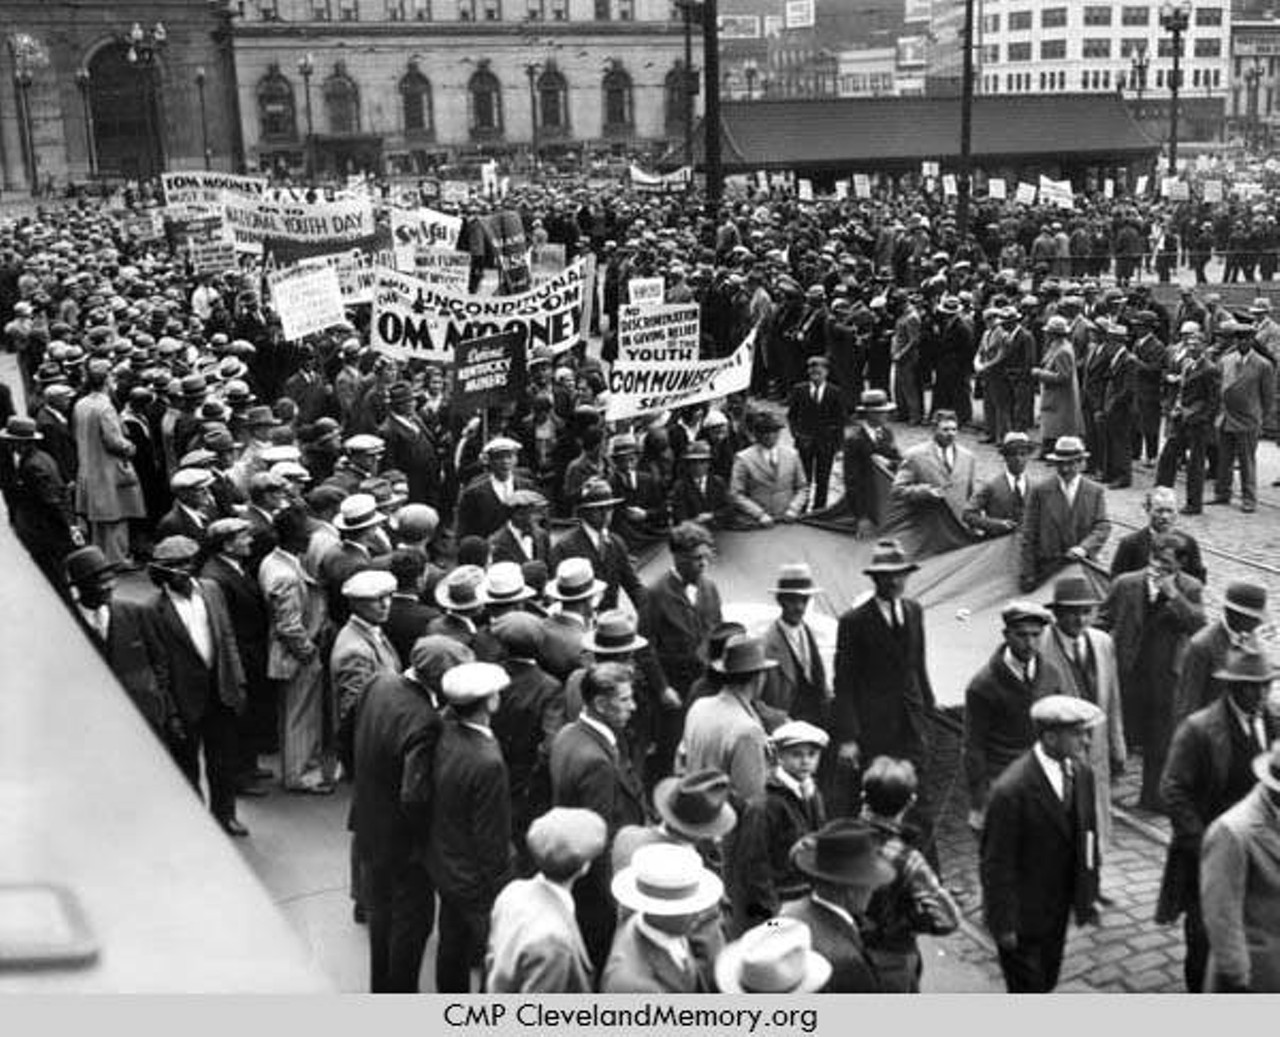  May Day Demonstration, 1932 